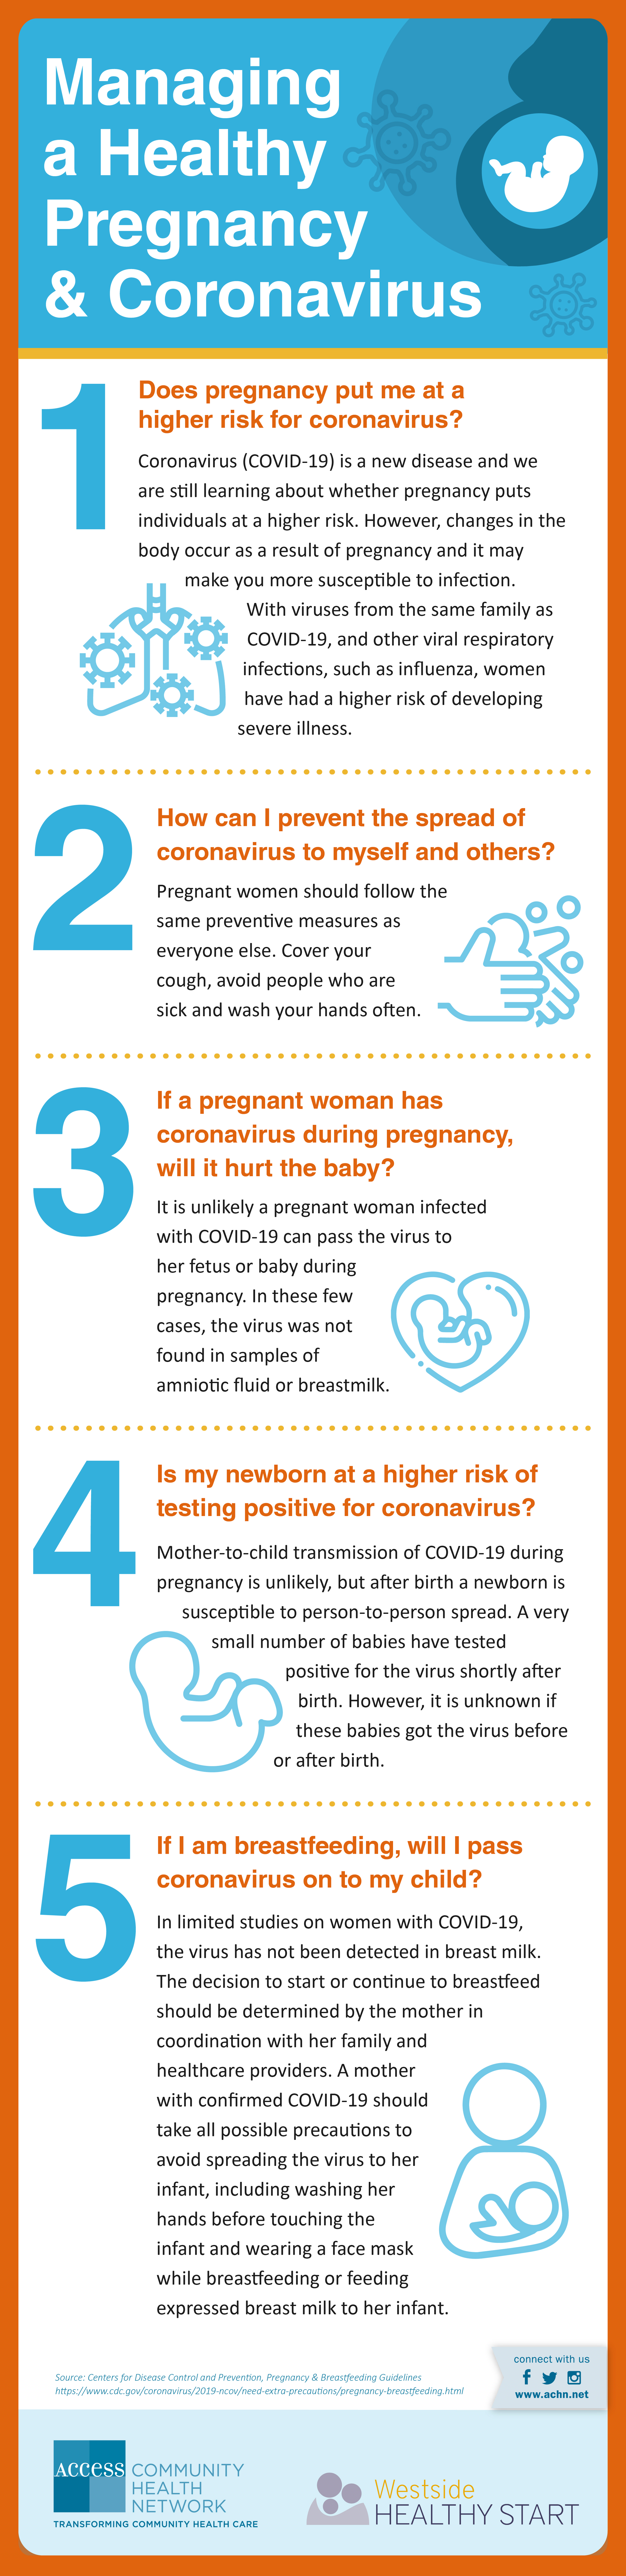 pregnancy in a pandemic infographic